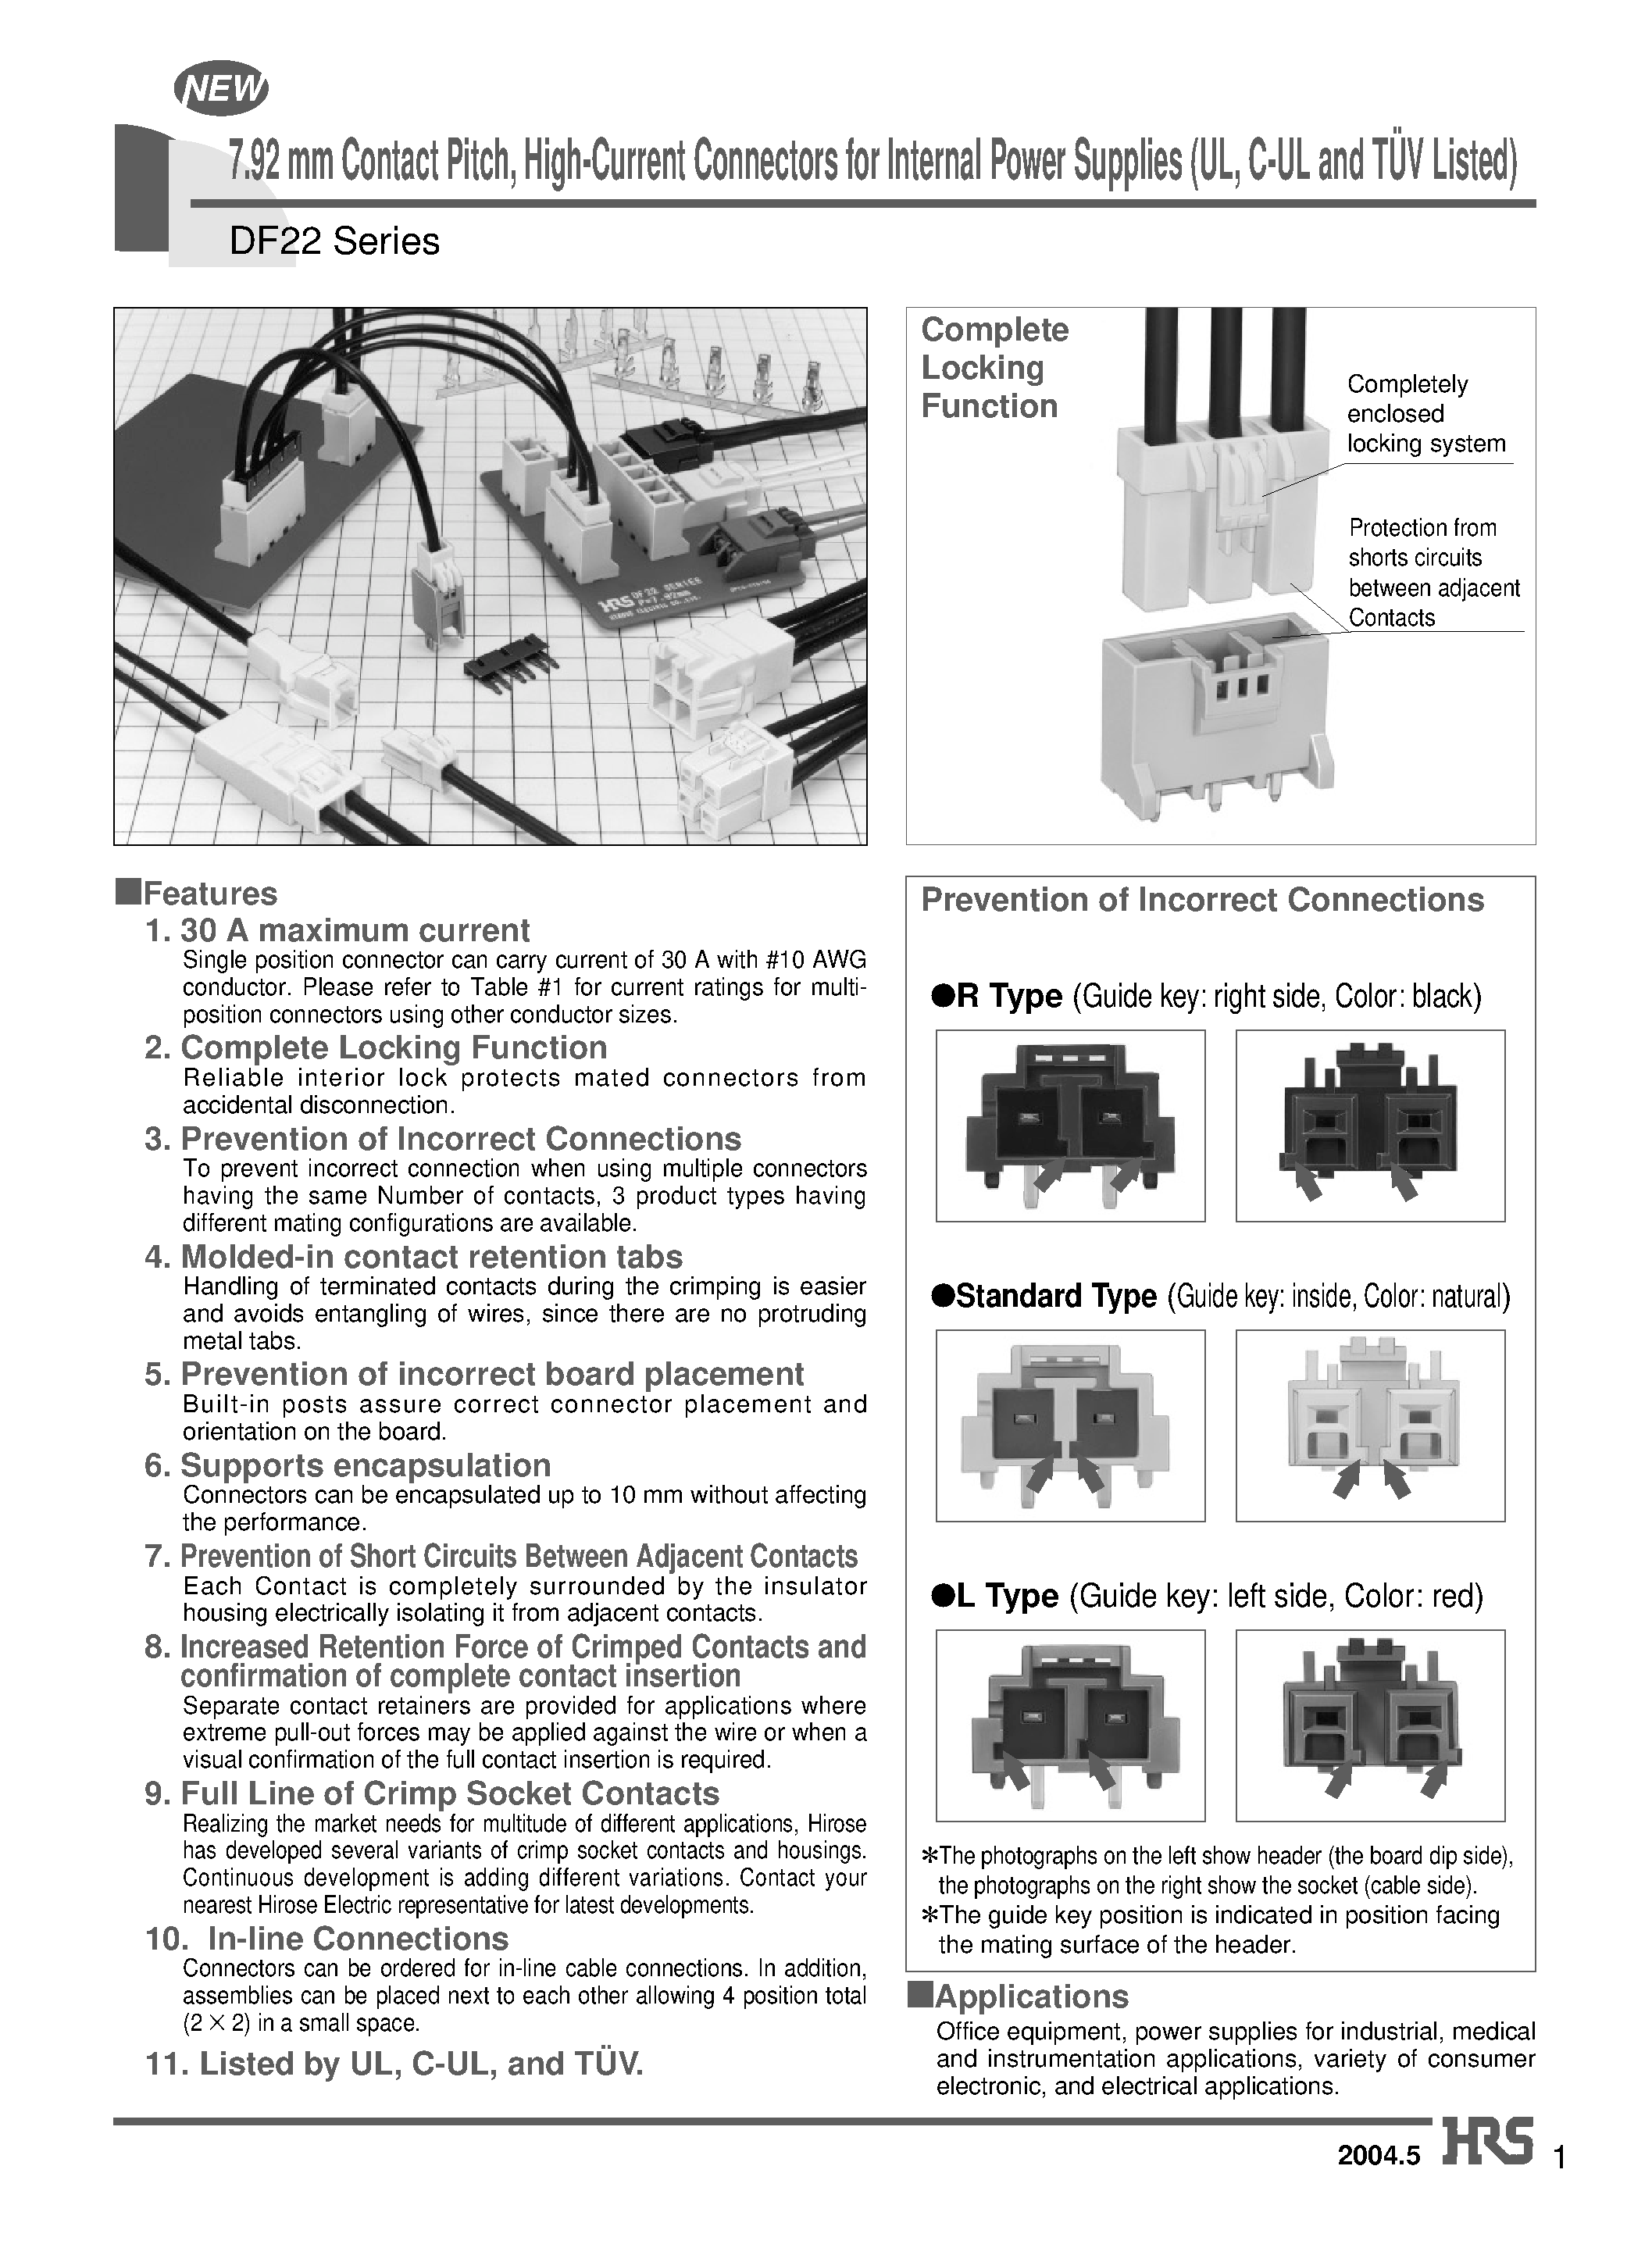 Datasheet DF22A-4S-7.92DSA - 7.92 mm Contact Pitch/ High-Current Connectors for Internal Power Supplies (UL/ C-UL and TUV Listed) page 1